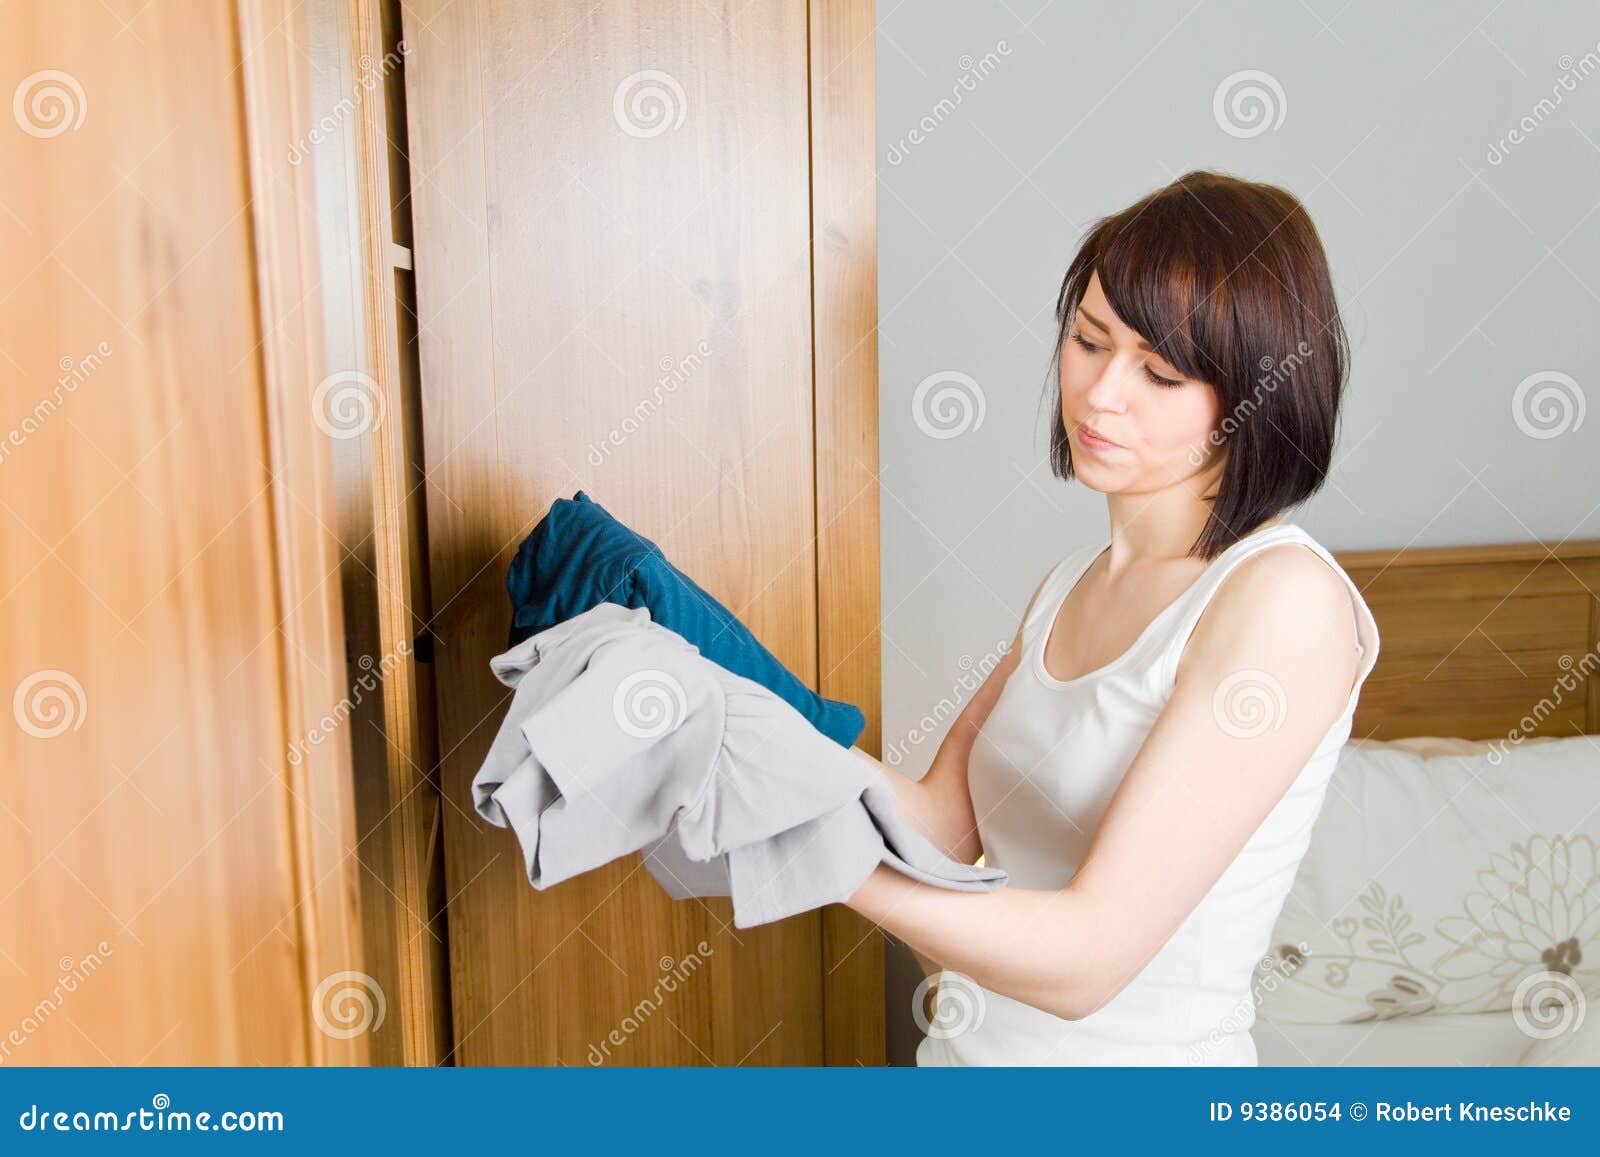 Indecision woman choosing outfit in clothes closet Stock Photo by